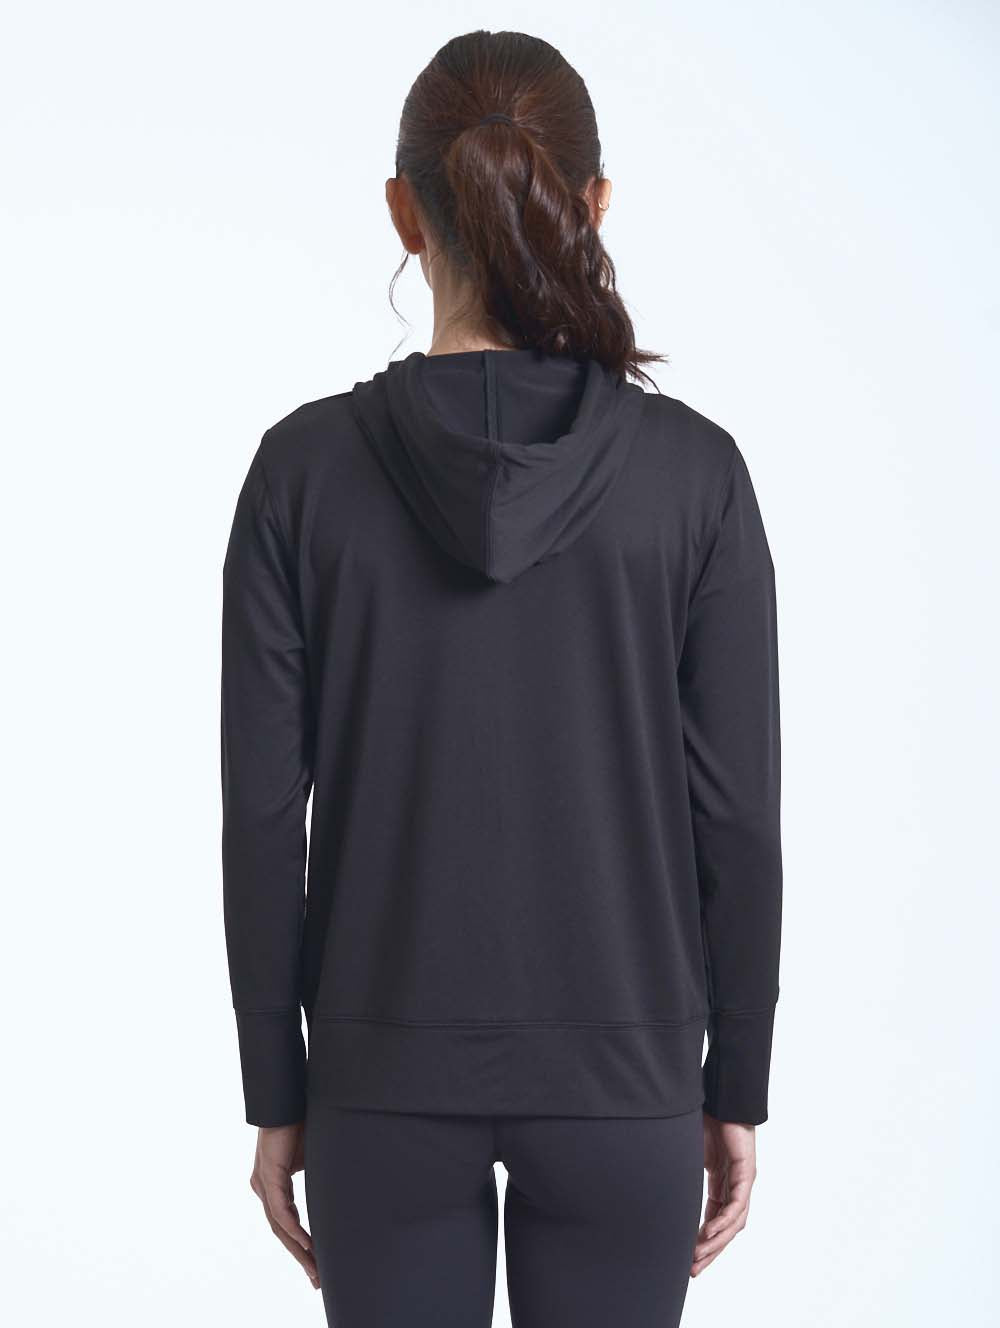 This cozy Lululemon hoodie has more than 2K 5-star reviews — and